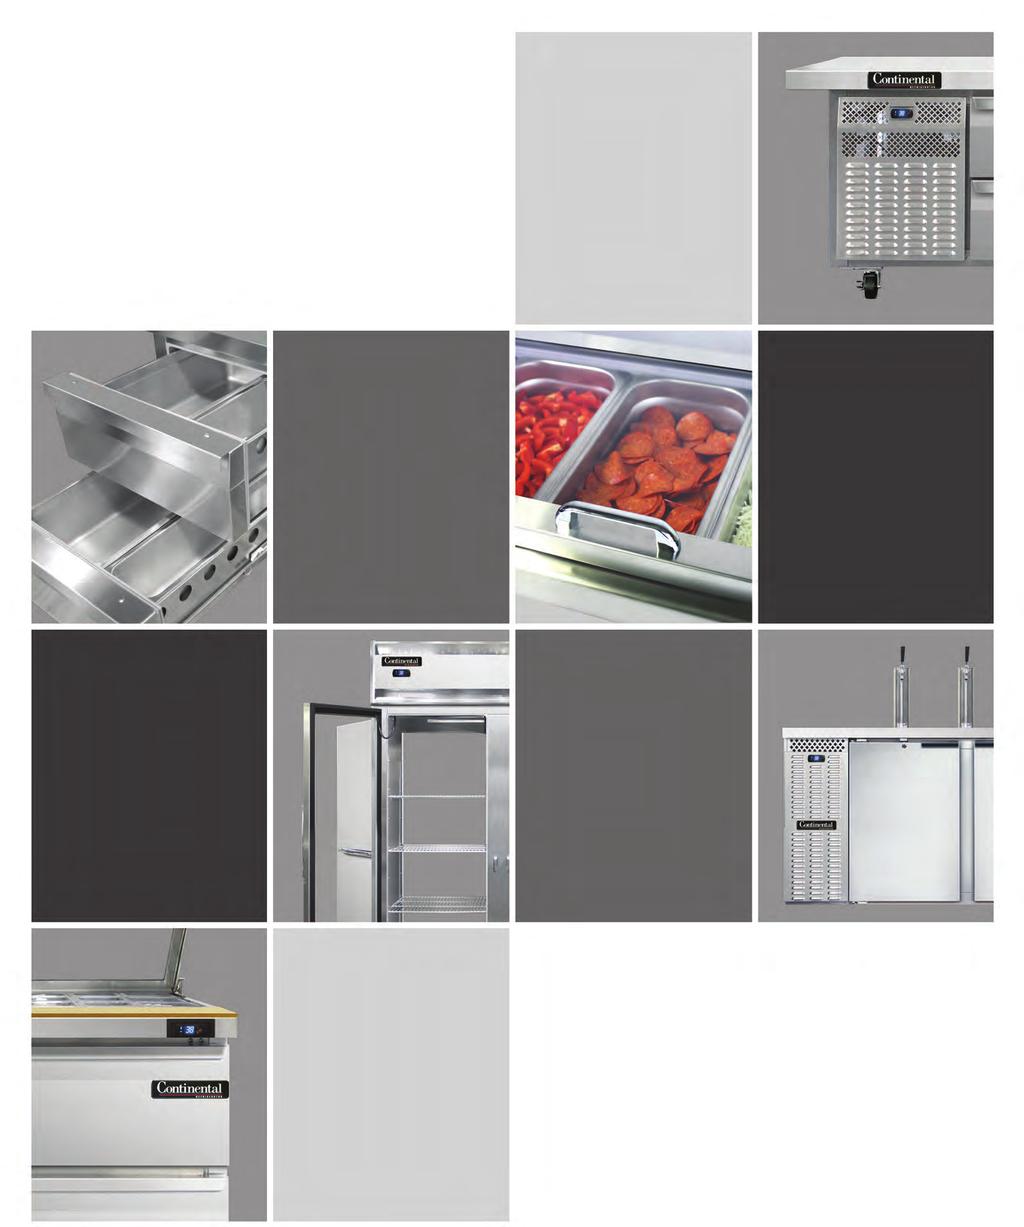 INNOVATIVE DESIGNS FOR YOUR FOODSERVICE NEEDS